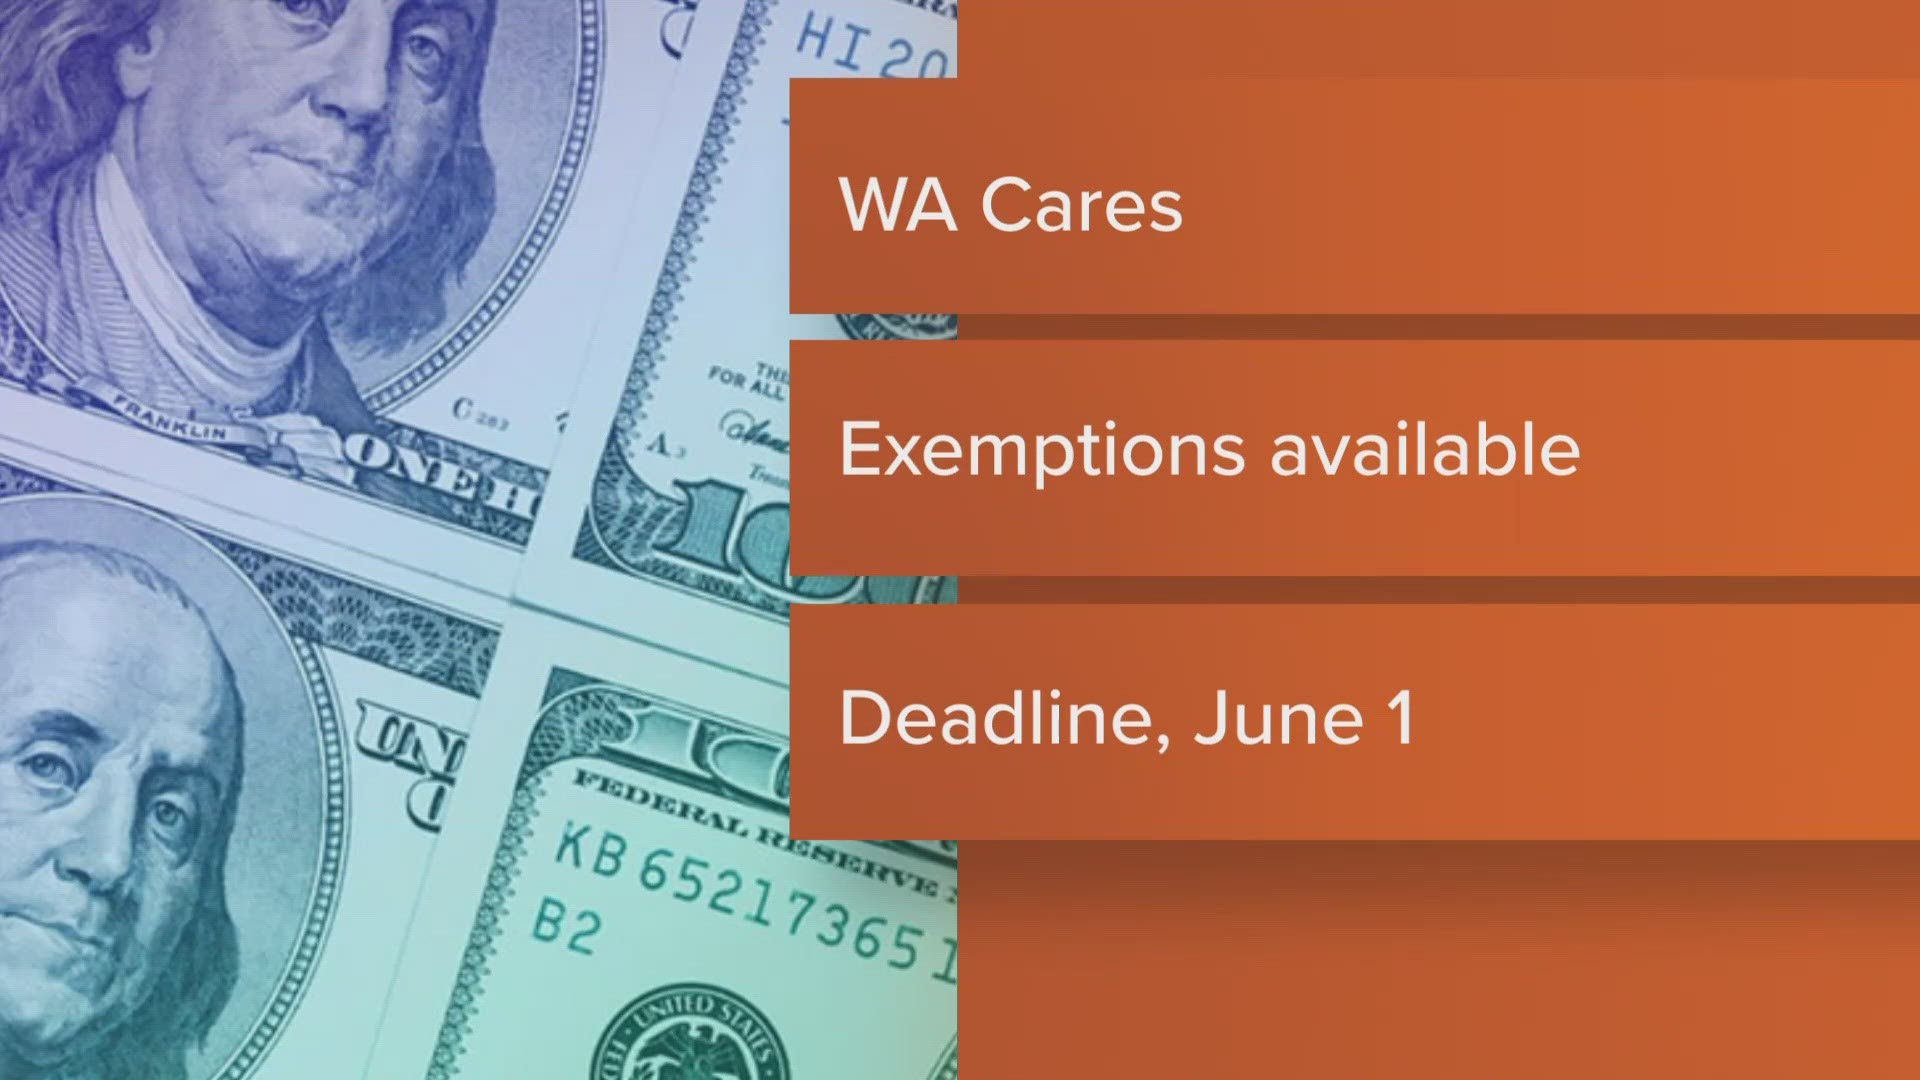 Beginning July 1, employers in Washington state will begin deducting premiums from paychecks for the WA Cares Fund.